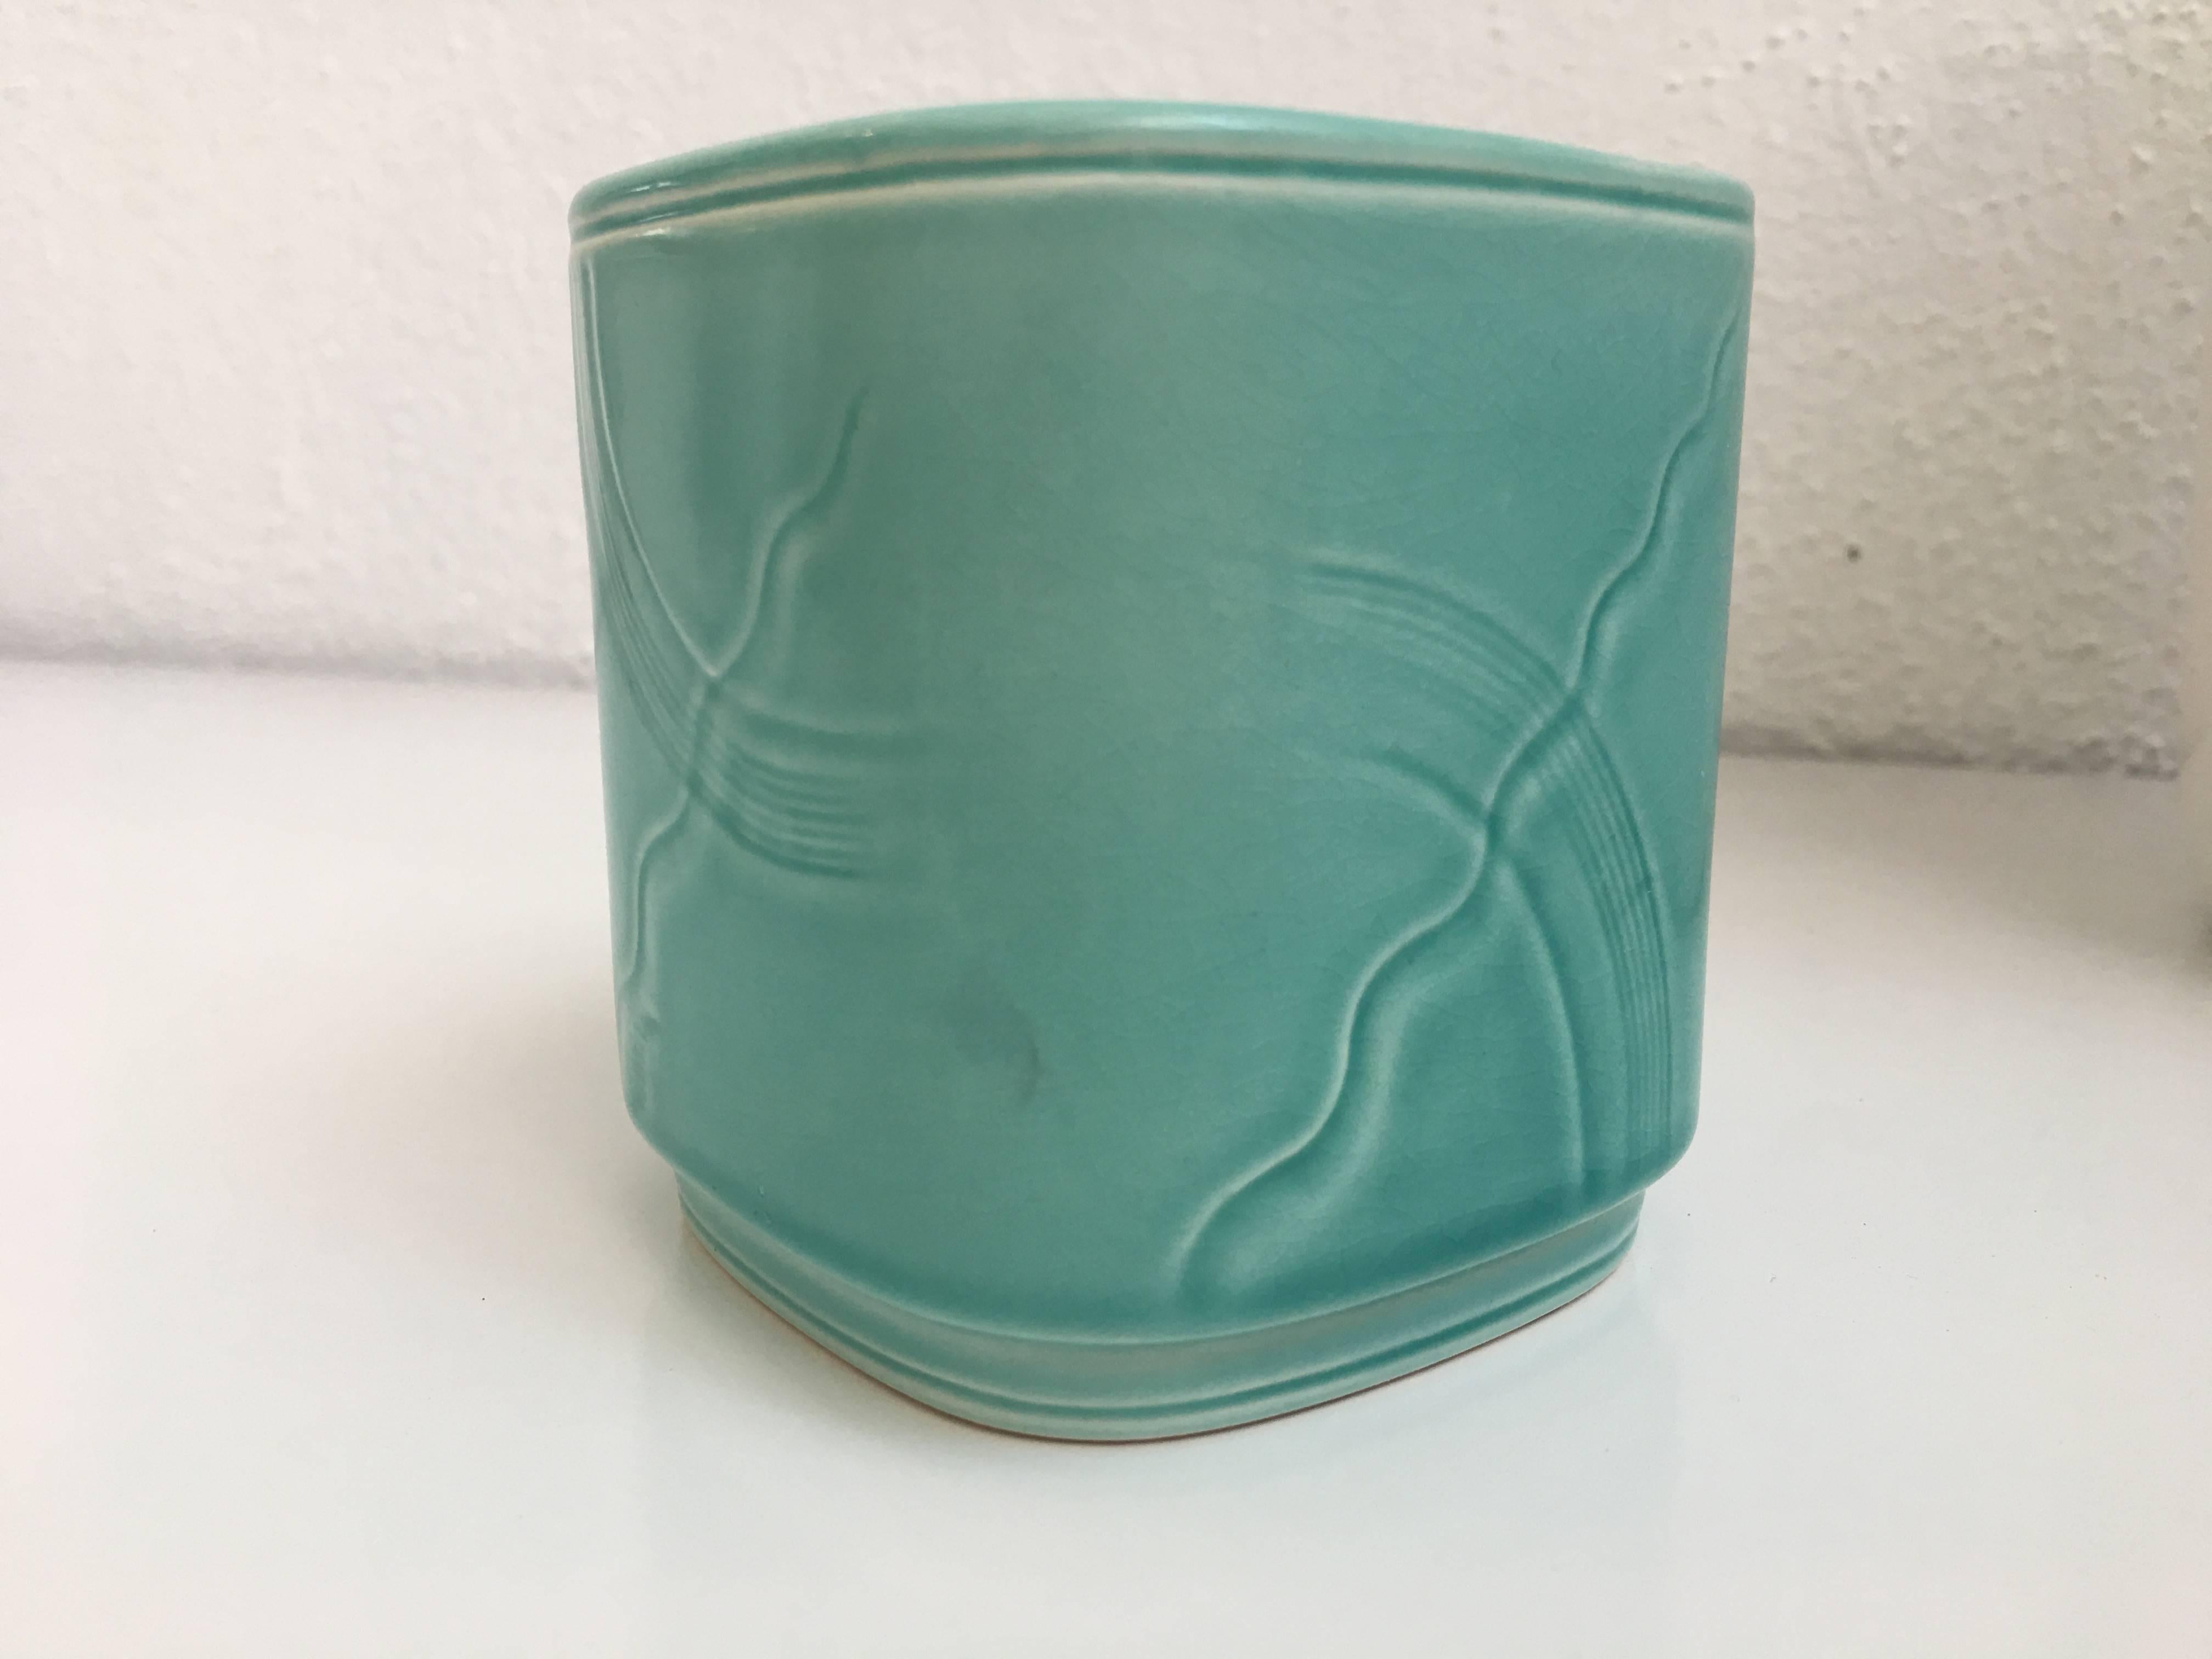 Danish Nils Thorsson for Aluminia, Solbjerg Vessel with Fish Motif For Sale